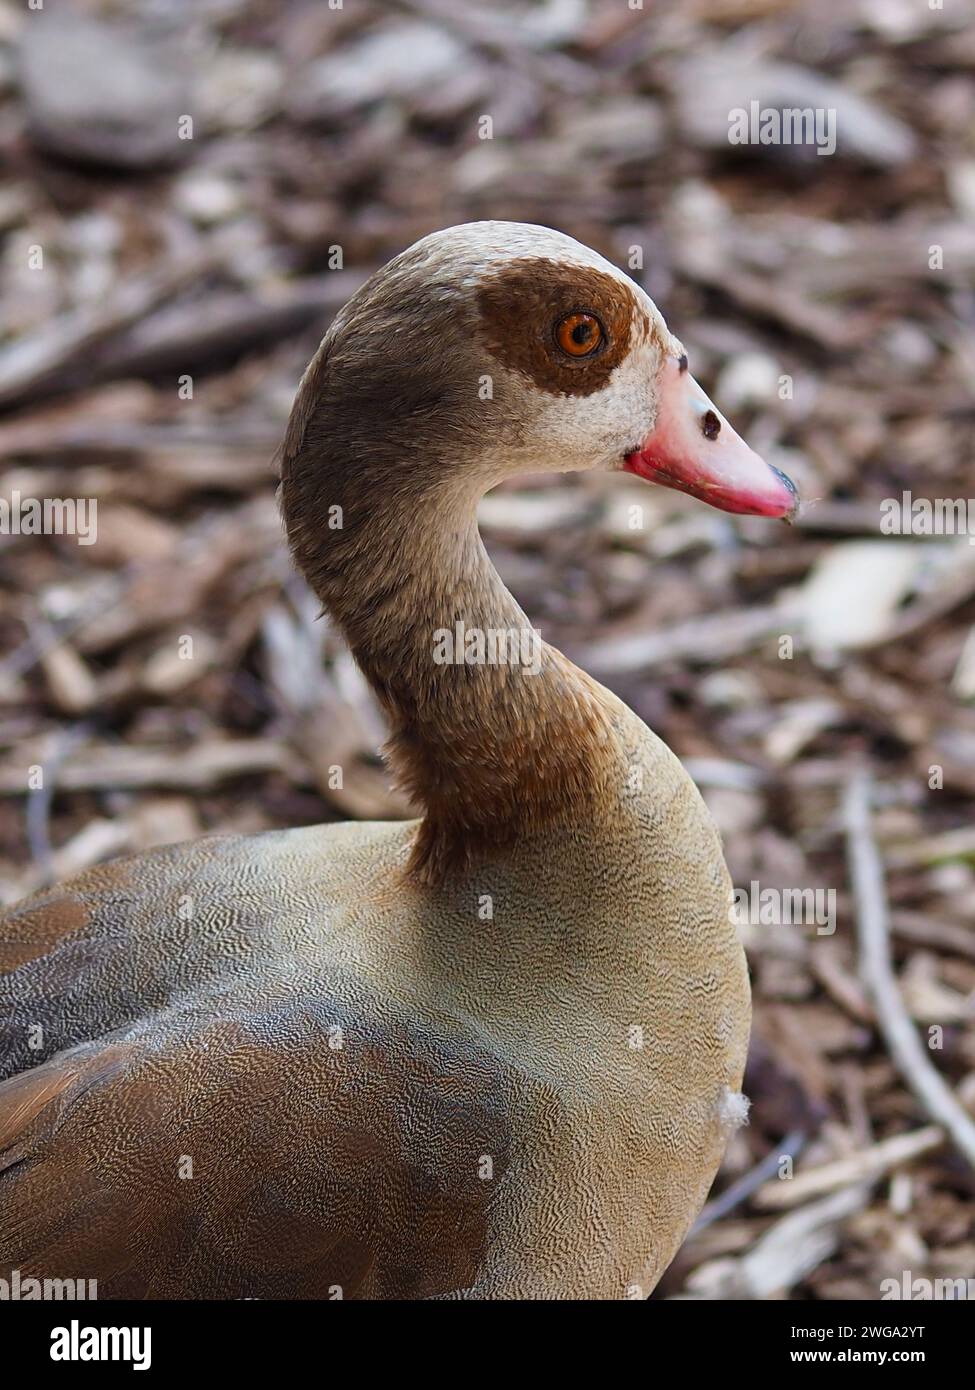 Exquisite chic female Egyptian Goose with bright eyes and pristine plumage. Stock Photo